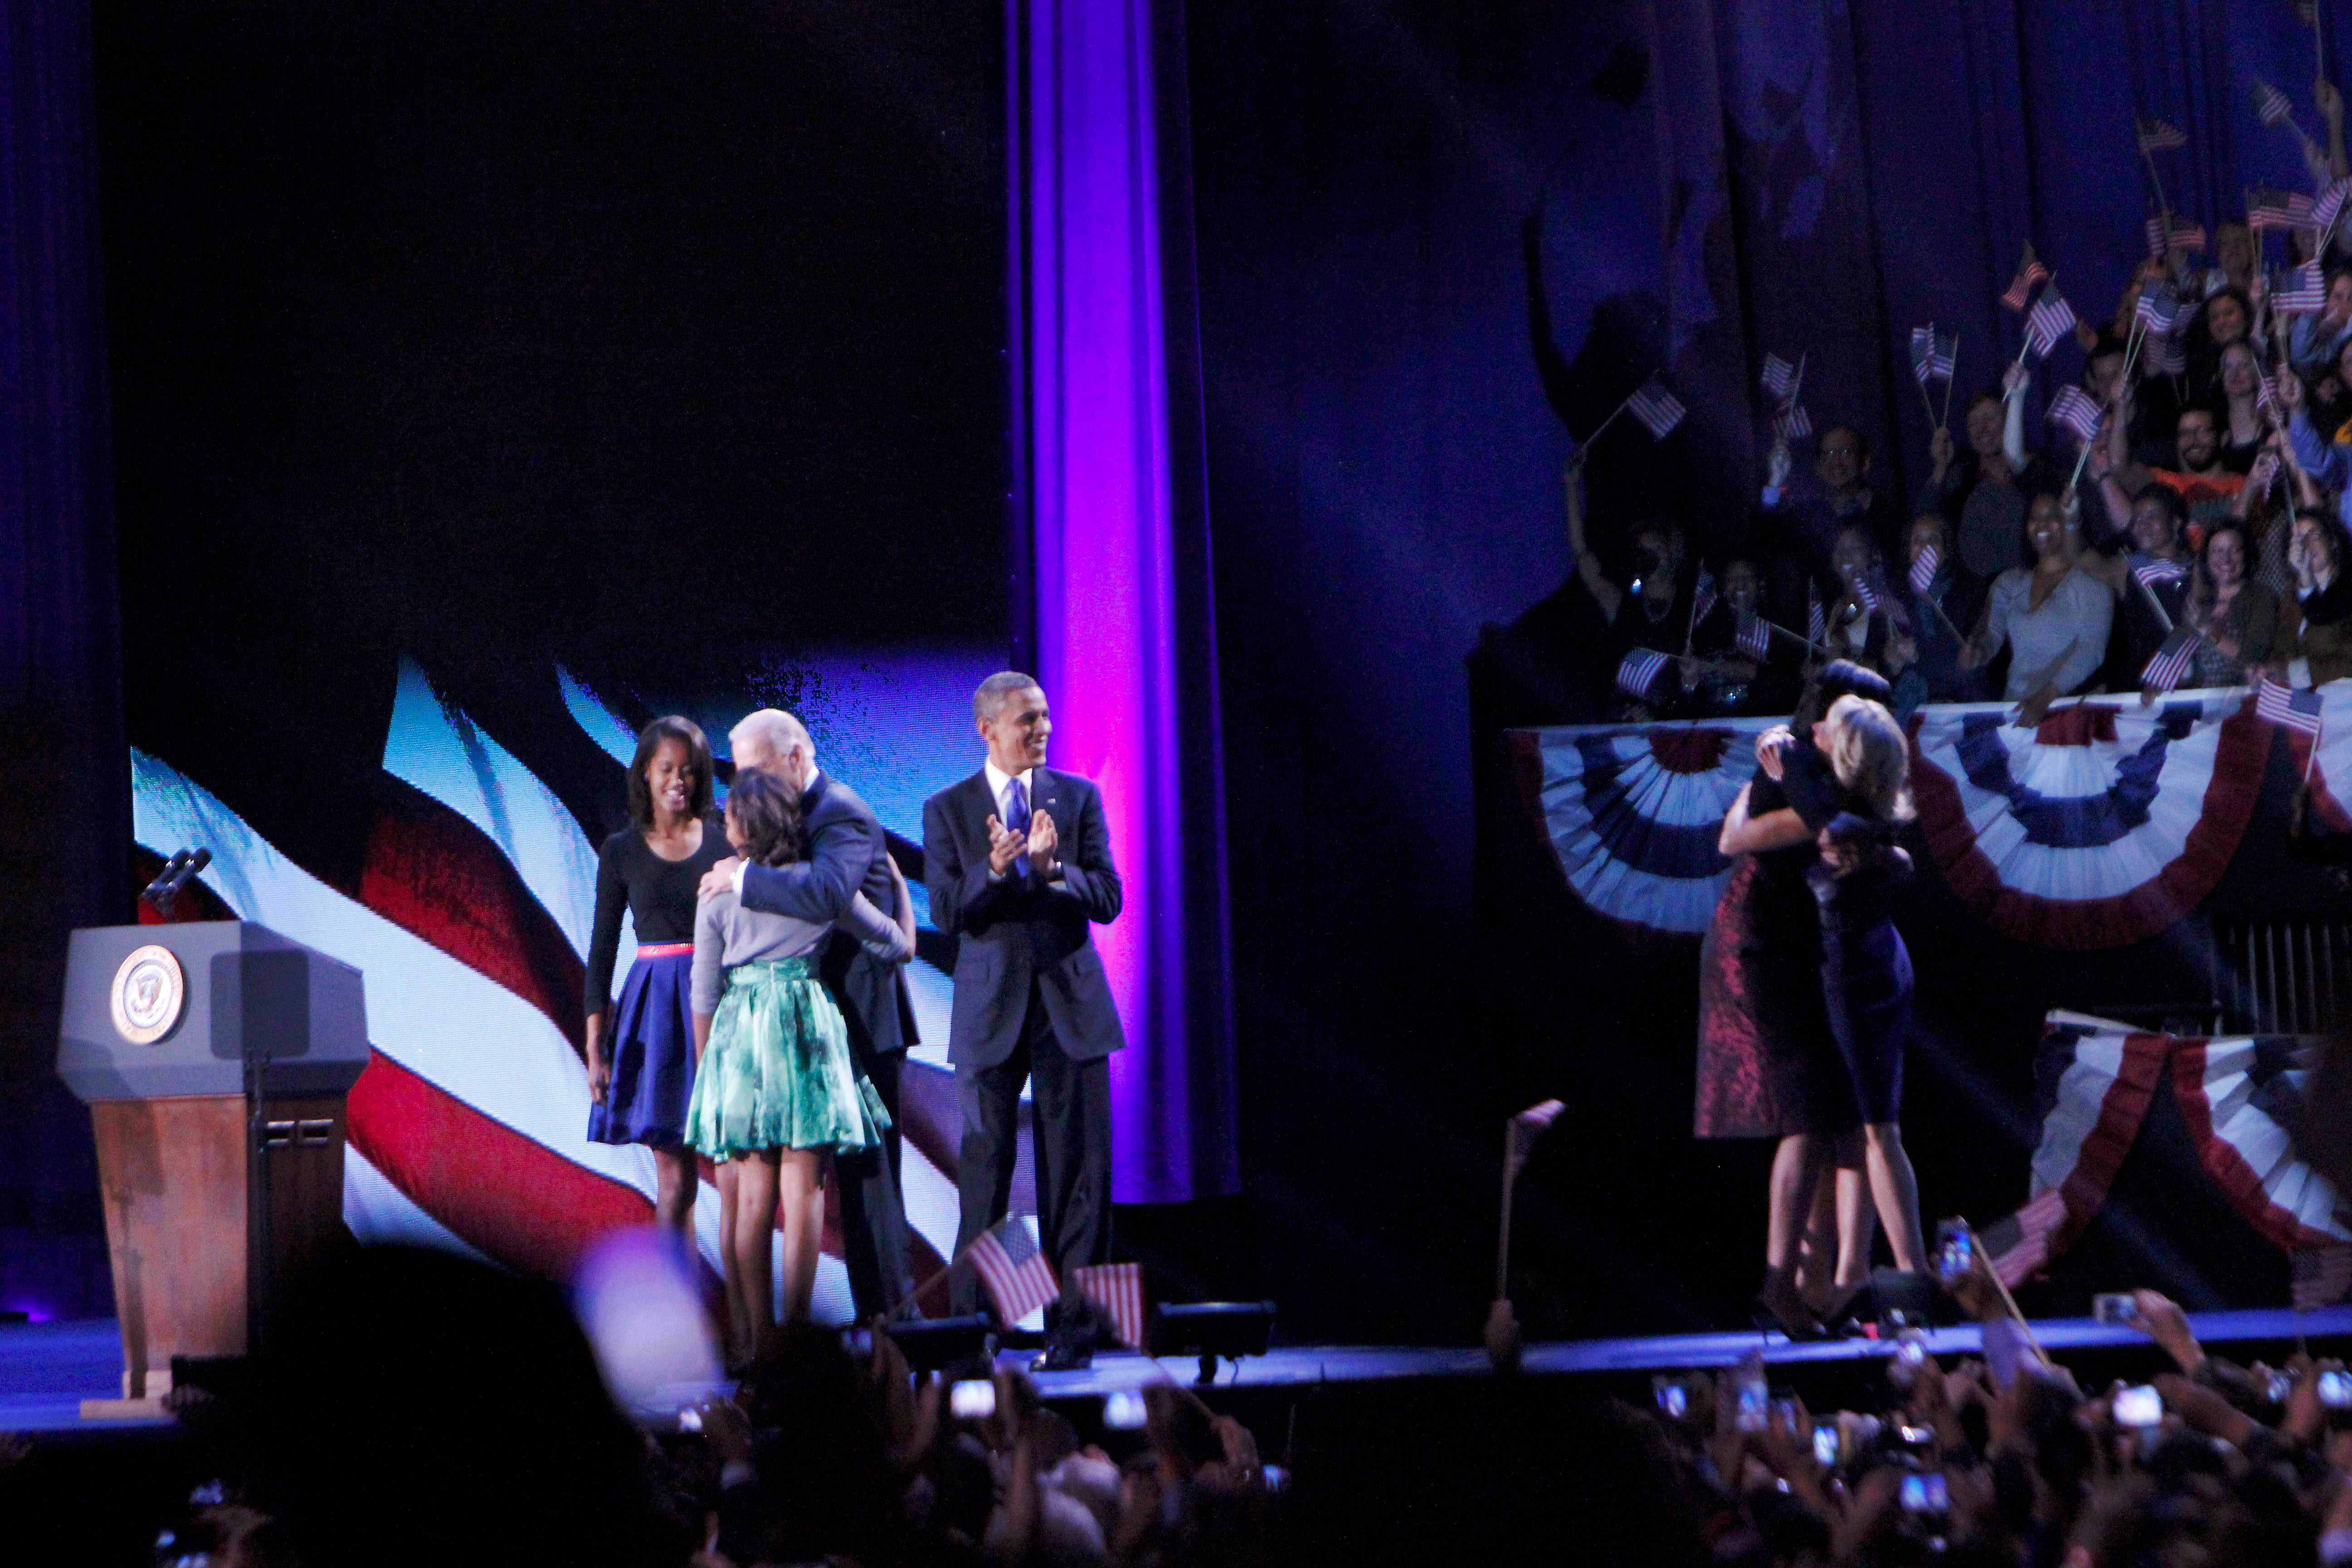 Vice President Joe Biden shares a celebratory hug with President Obamas daughters, Malia (left) and Natasha (right) while Jill Biden and First Lady Michelle Obama embrace one another on the stage of  McCormick Place before the thousands of rally attendees following President Obamas speech.